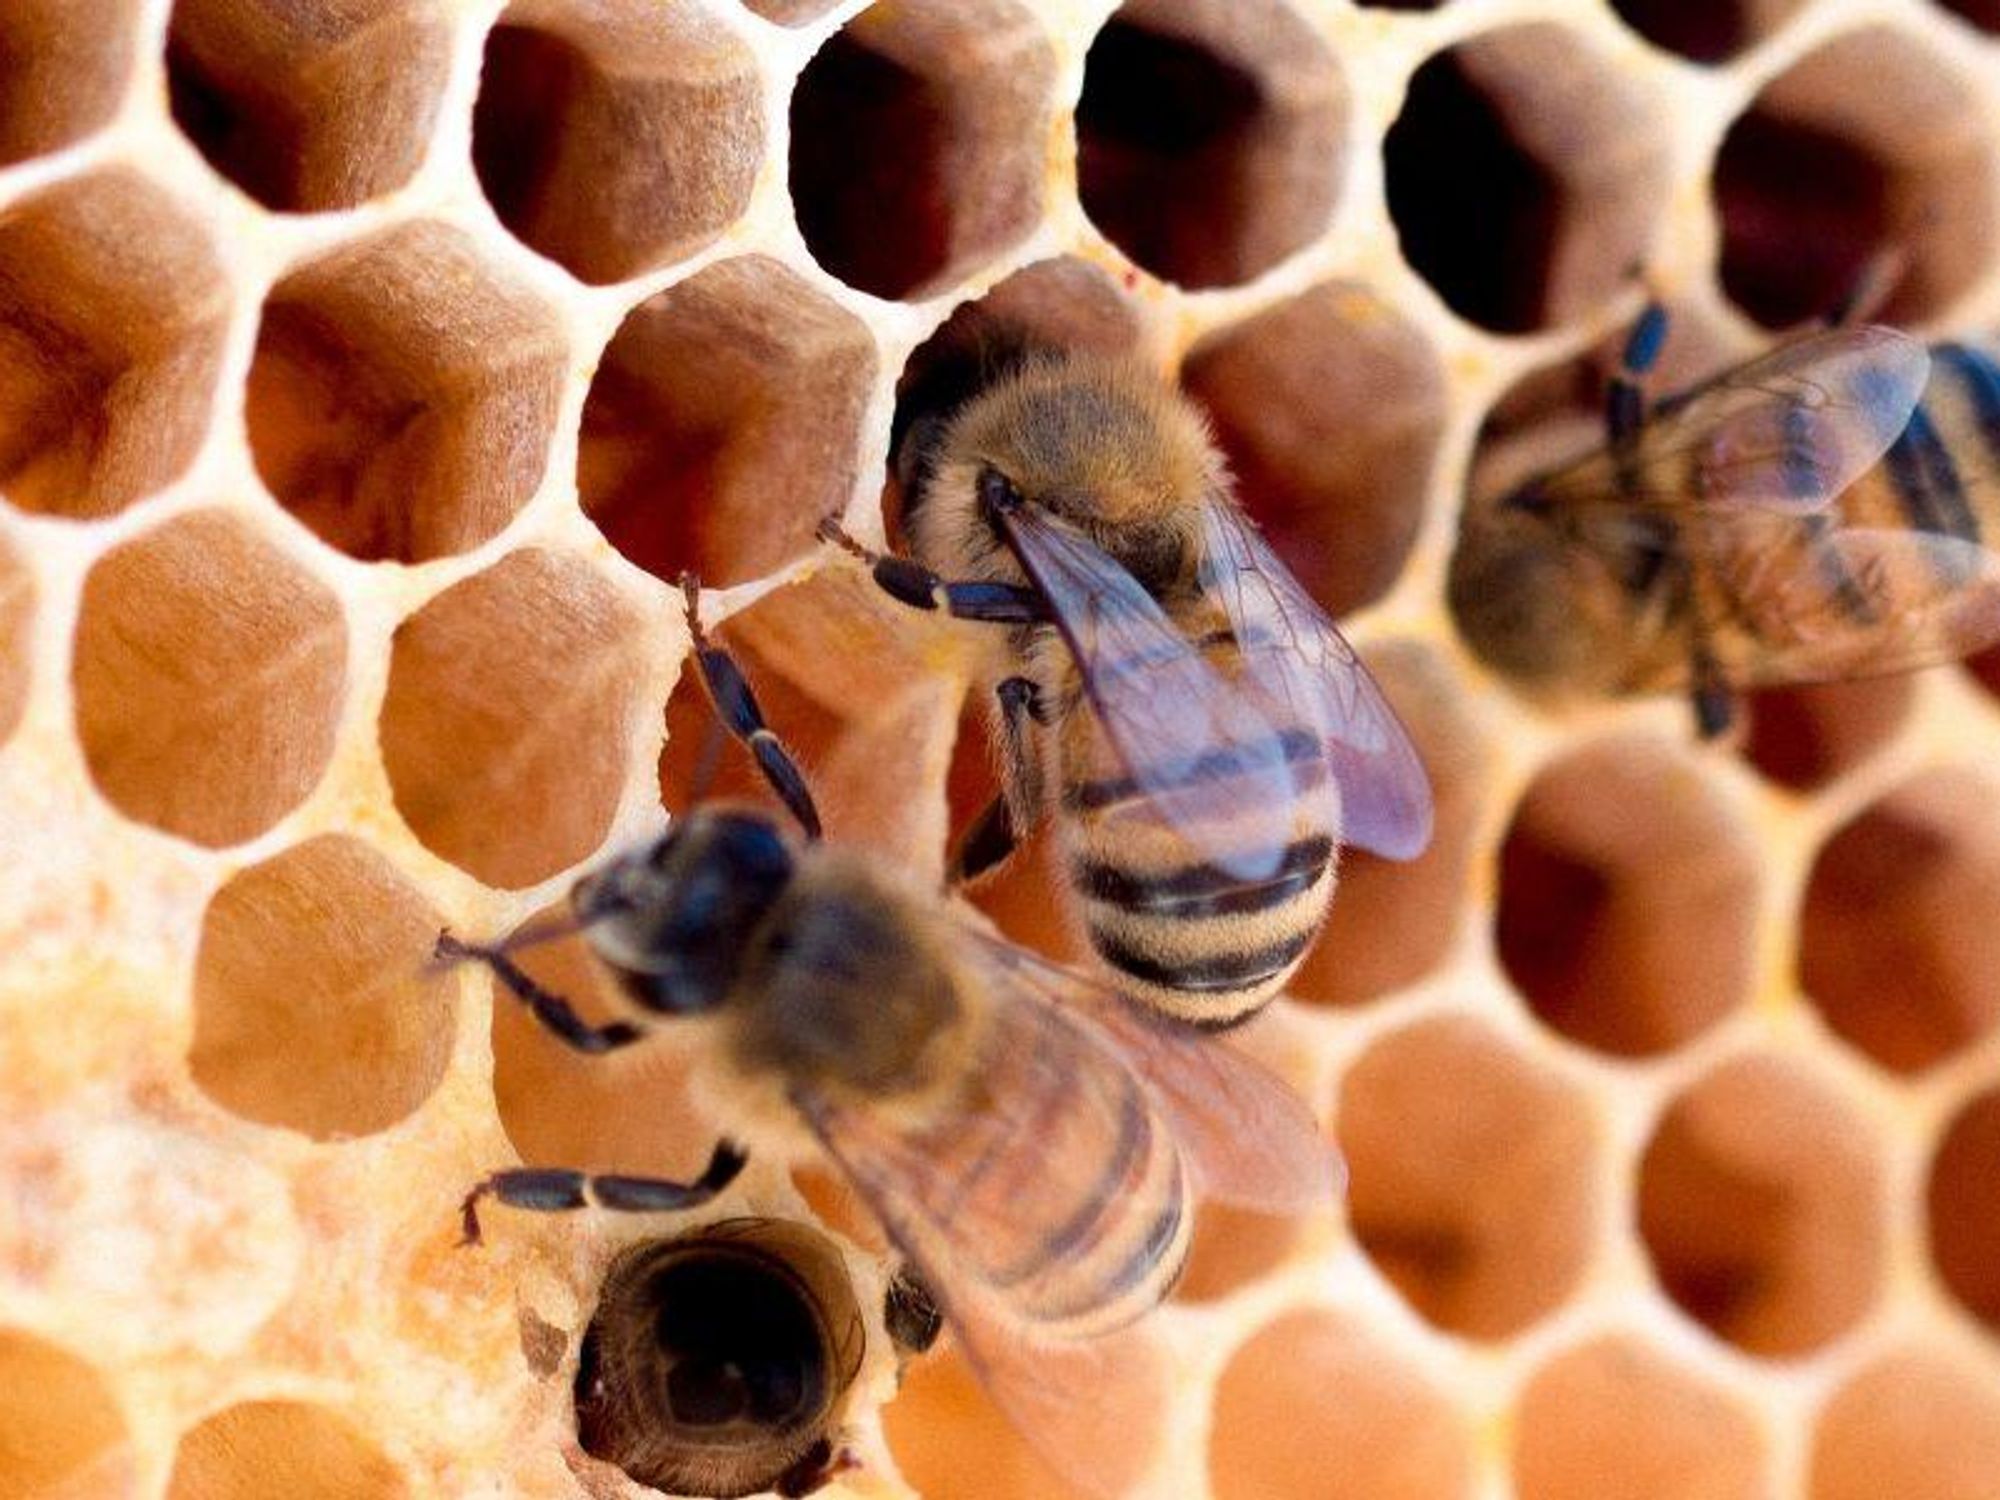 What to know about the world's first honeybee vaccine